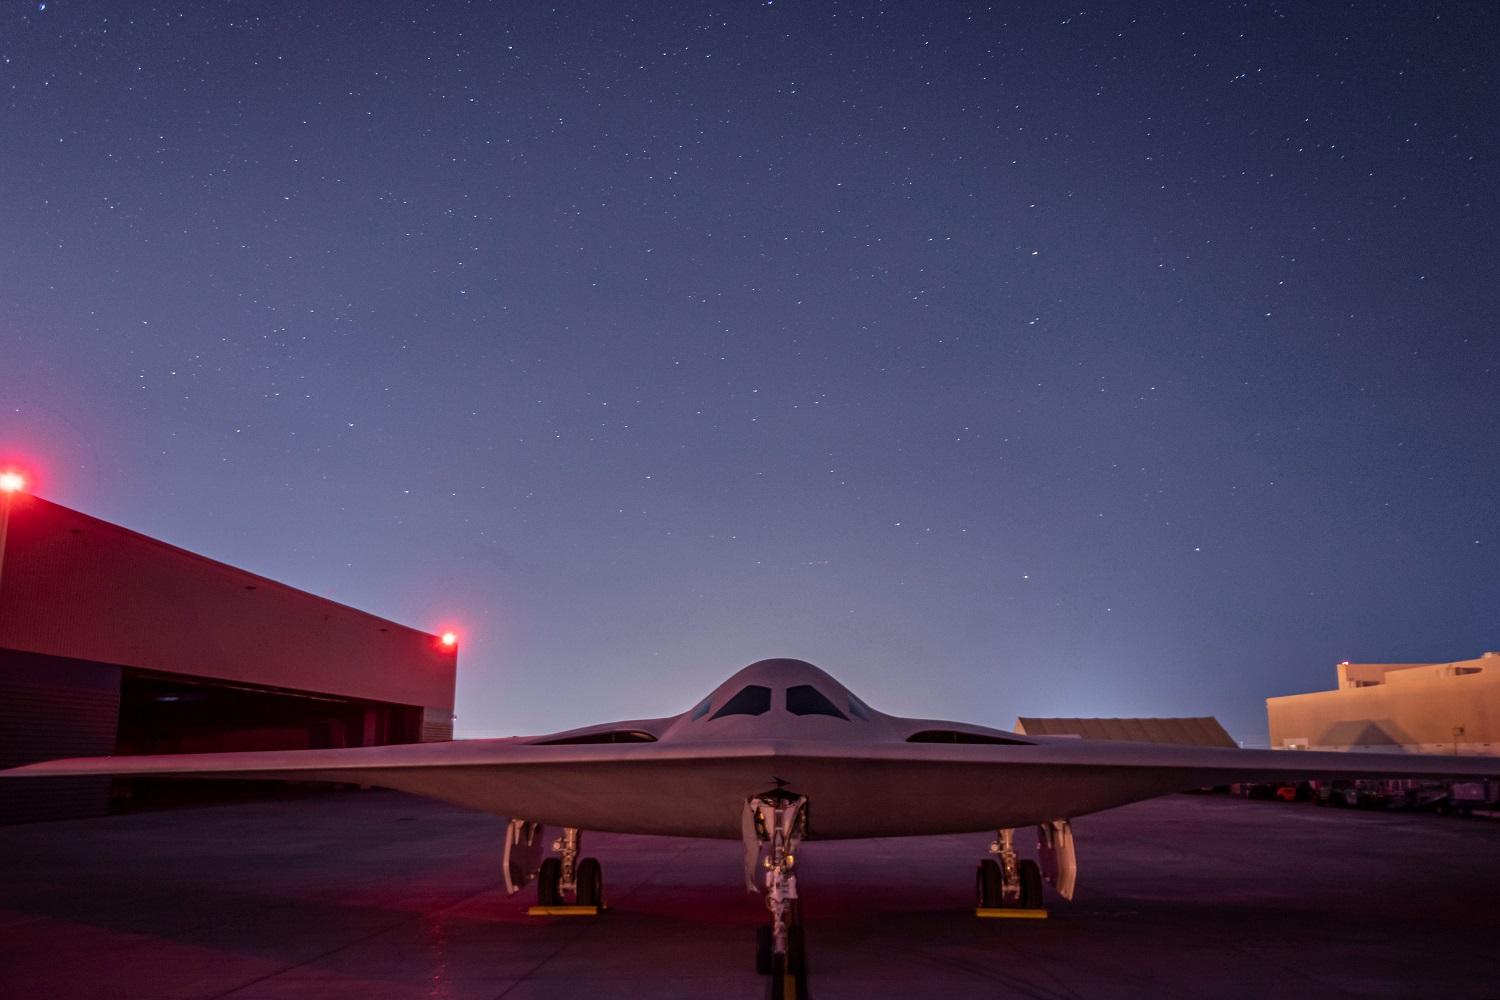 The B-21 Raider will be a dual-capable, penetrating-strike stealth bomber capable of delivering both conventional and nuclear munitions. The B-21 will form the backbone of the future Air Force bomber force consisting of B-21s and B-52s.